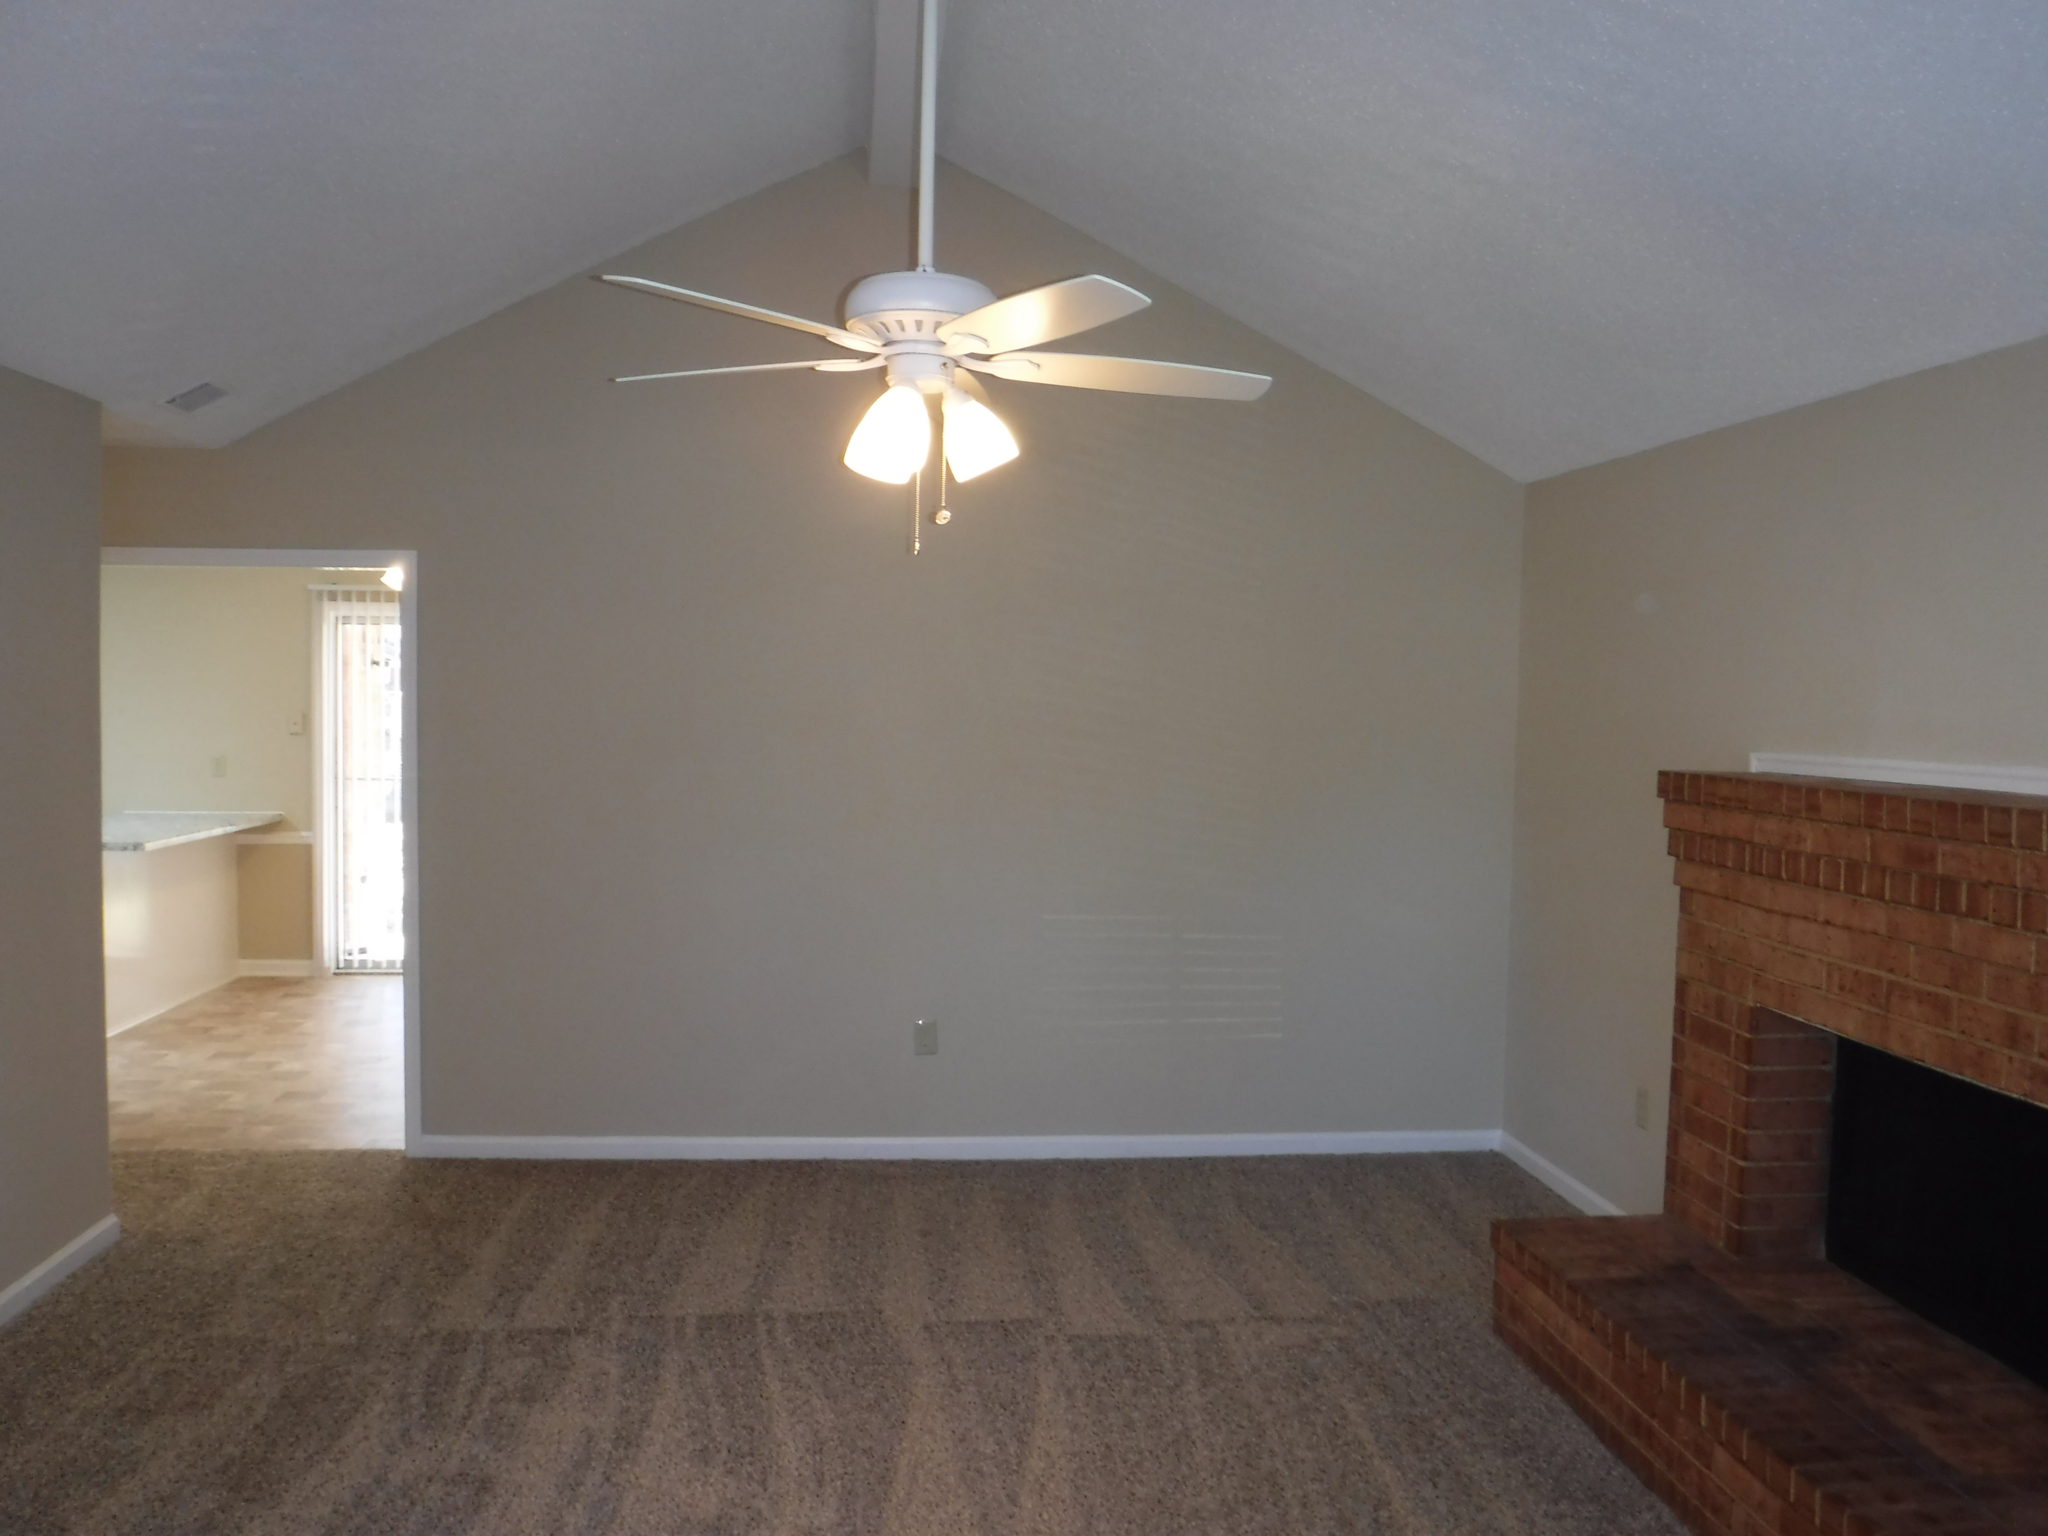 15 X 18 SEPARATE LIVING ROOM WITH HIGH CEILINGS AND NEW CEILING FAN